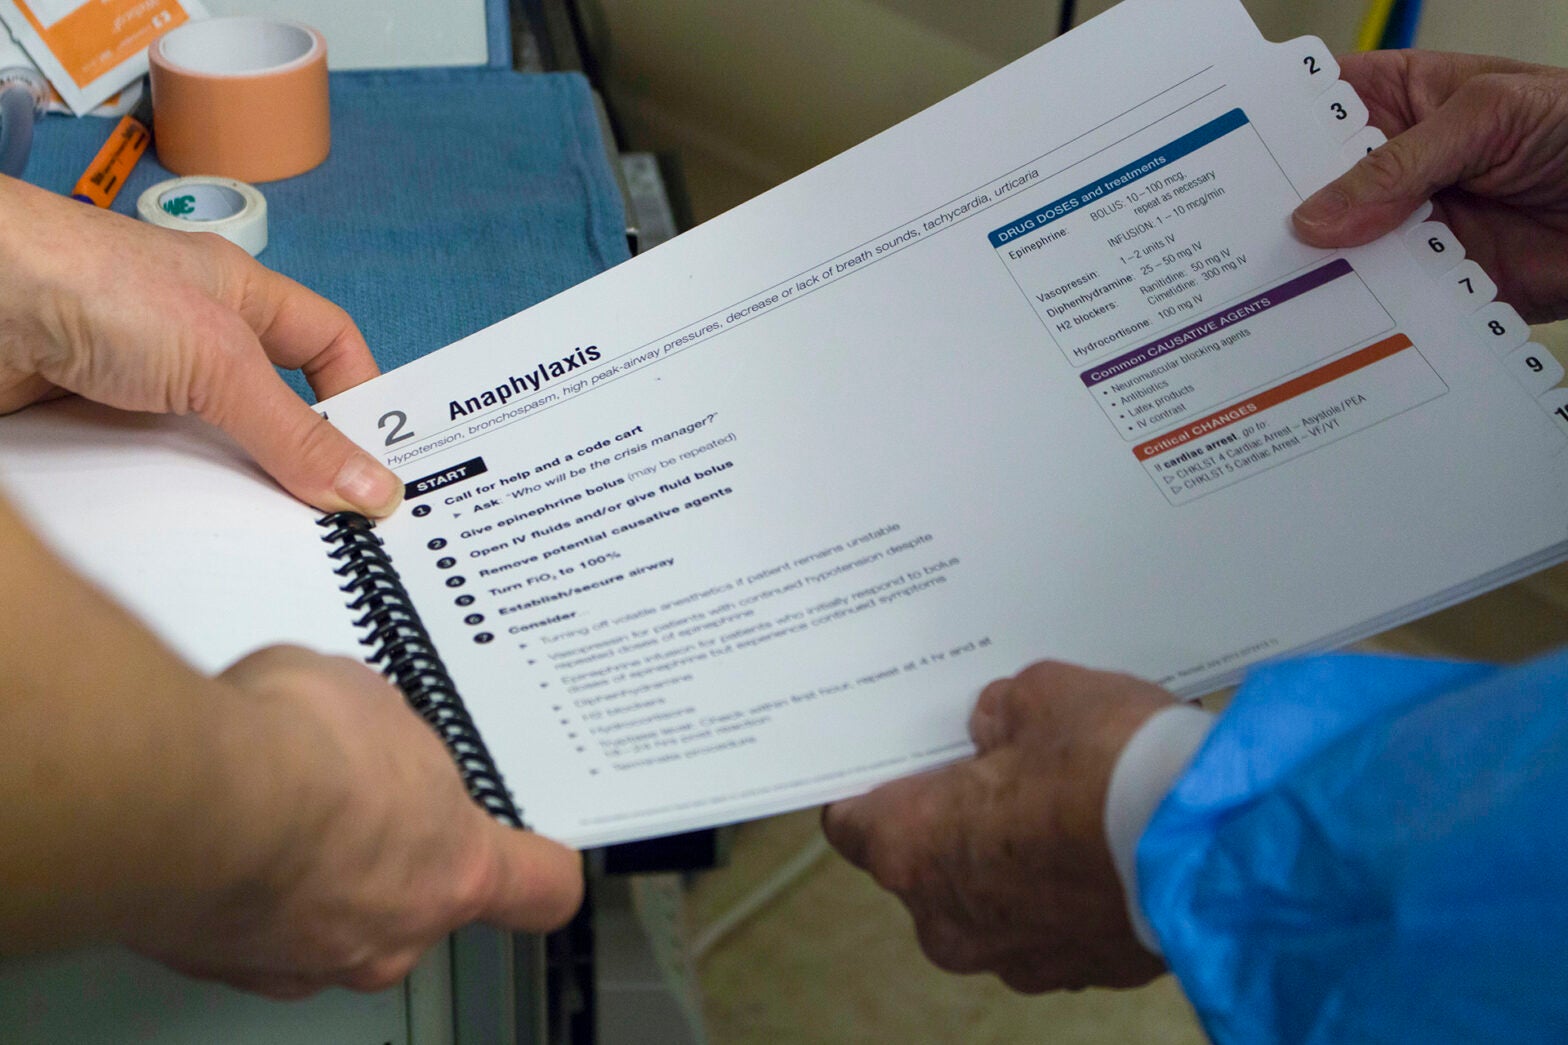 Clinicians use a page from the Operating Room Crisis Checklists during surgery.